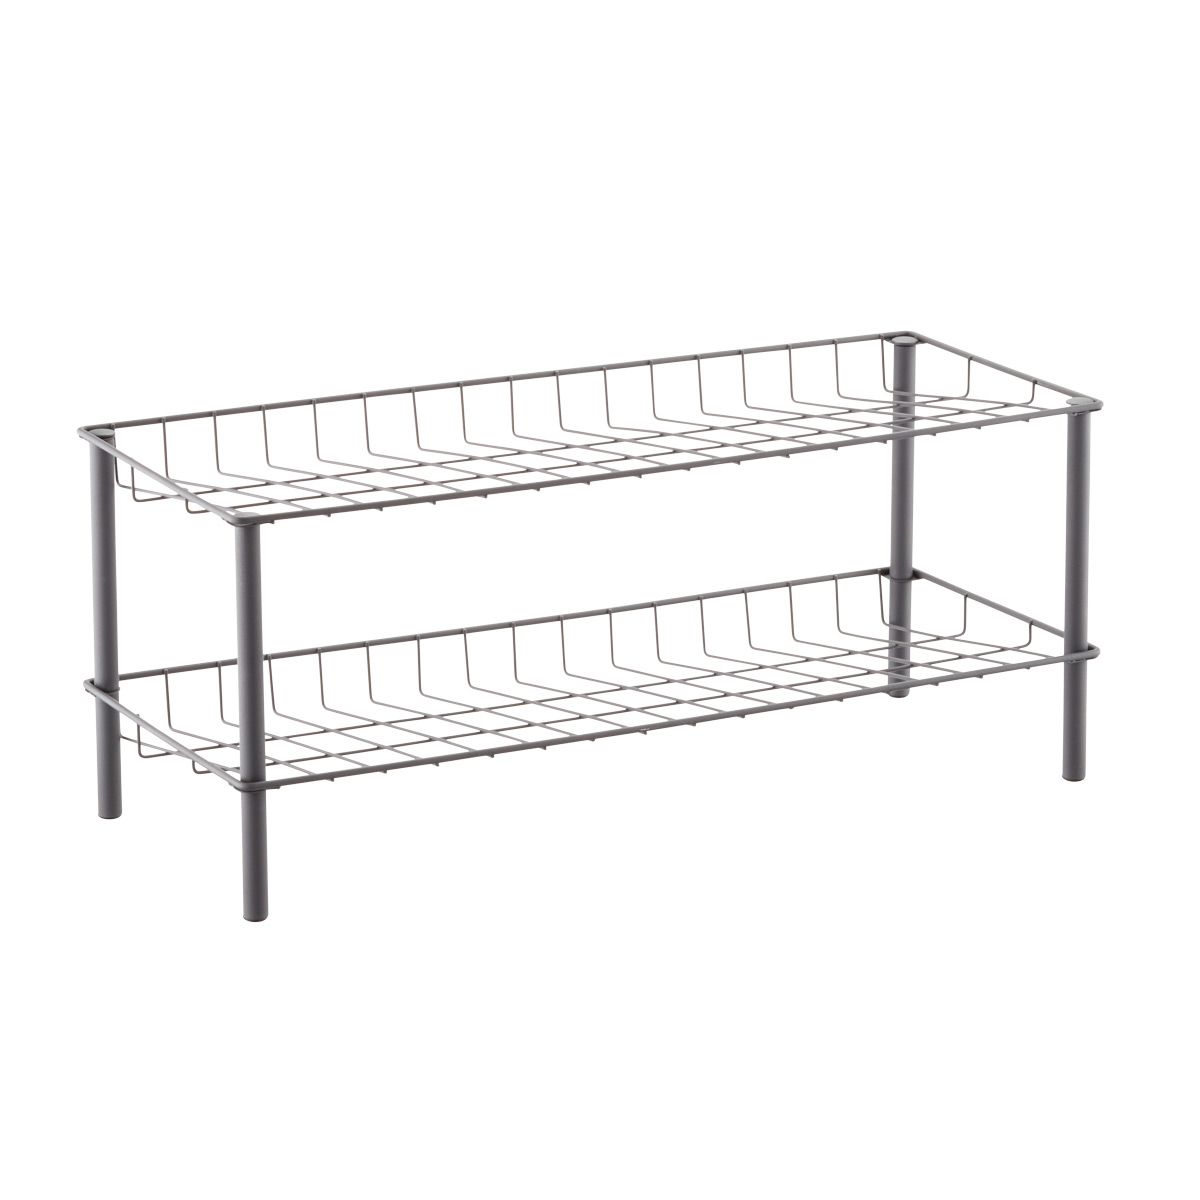 2-Tier Metal Shoe Rack | The Container Store